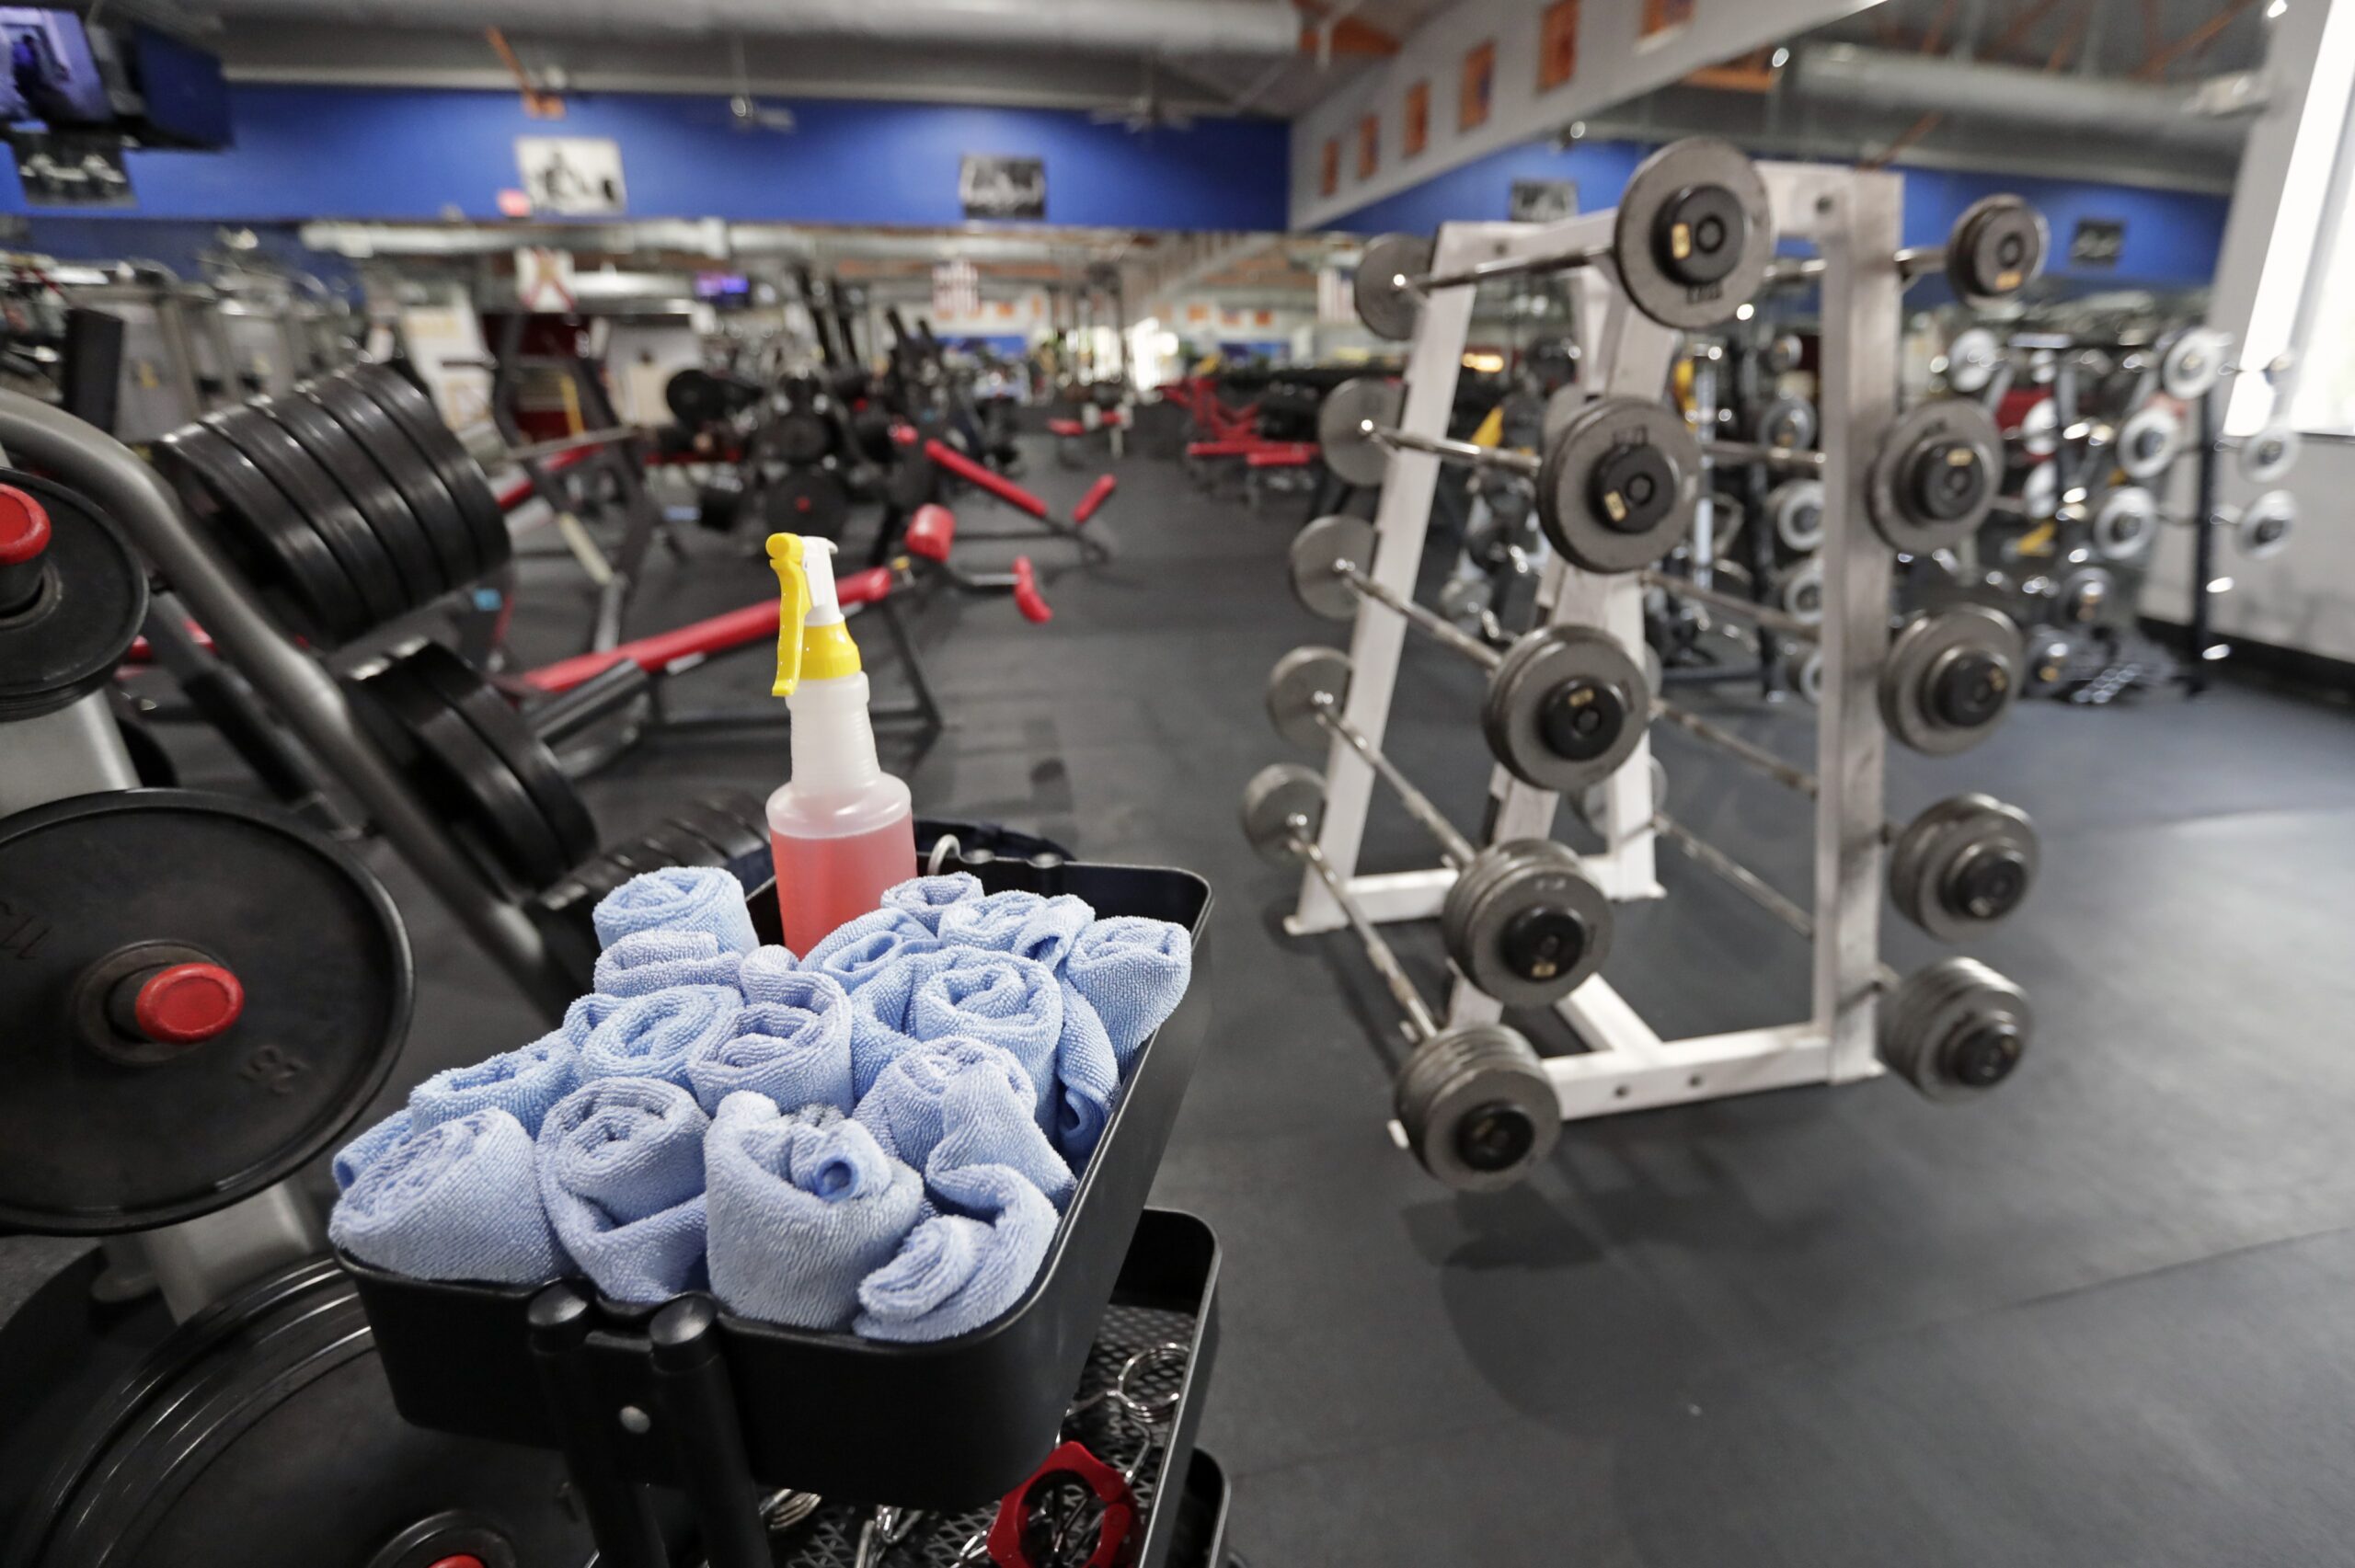 A Florida gym has towels and sanitizing spray readily available to visitors.